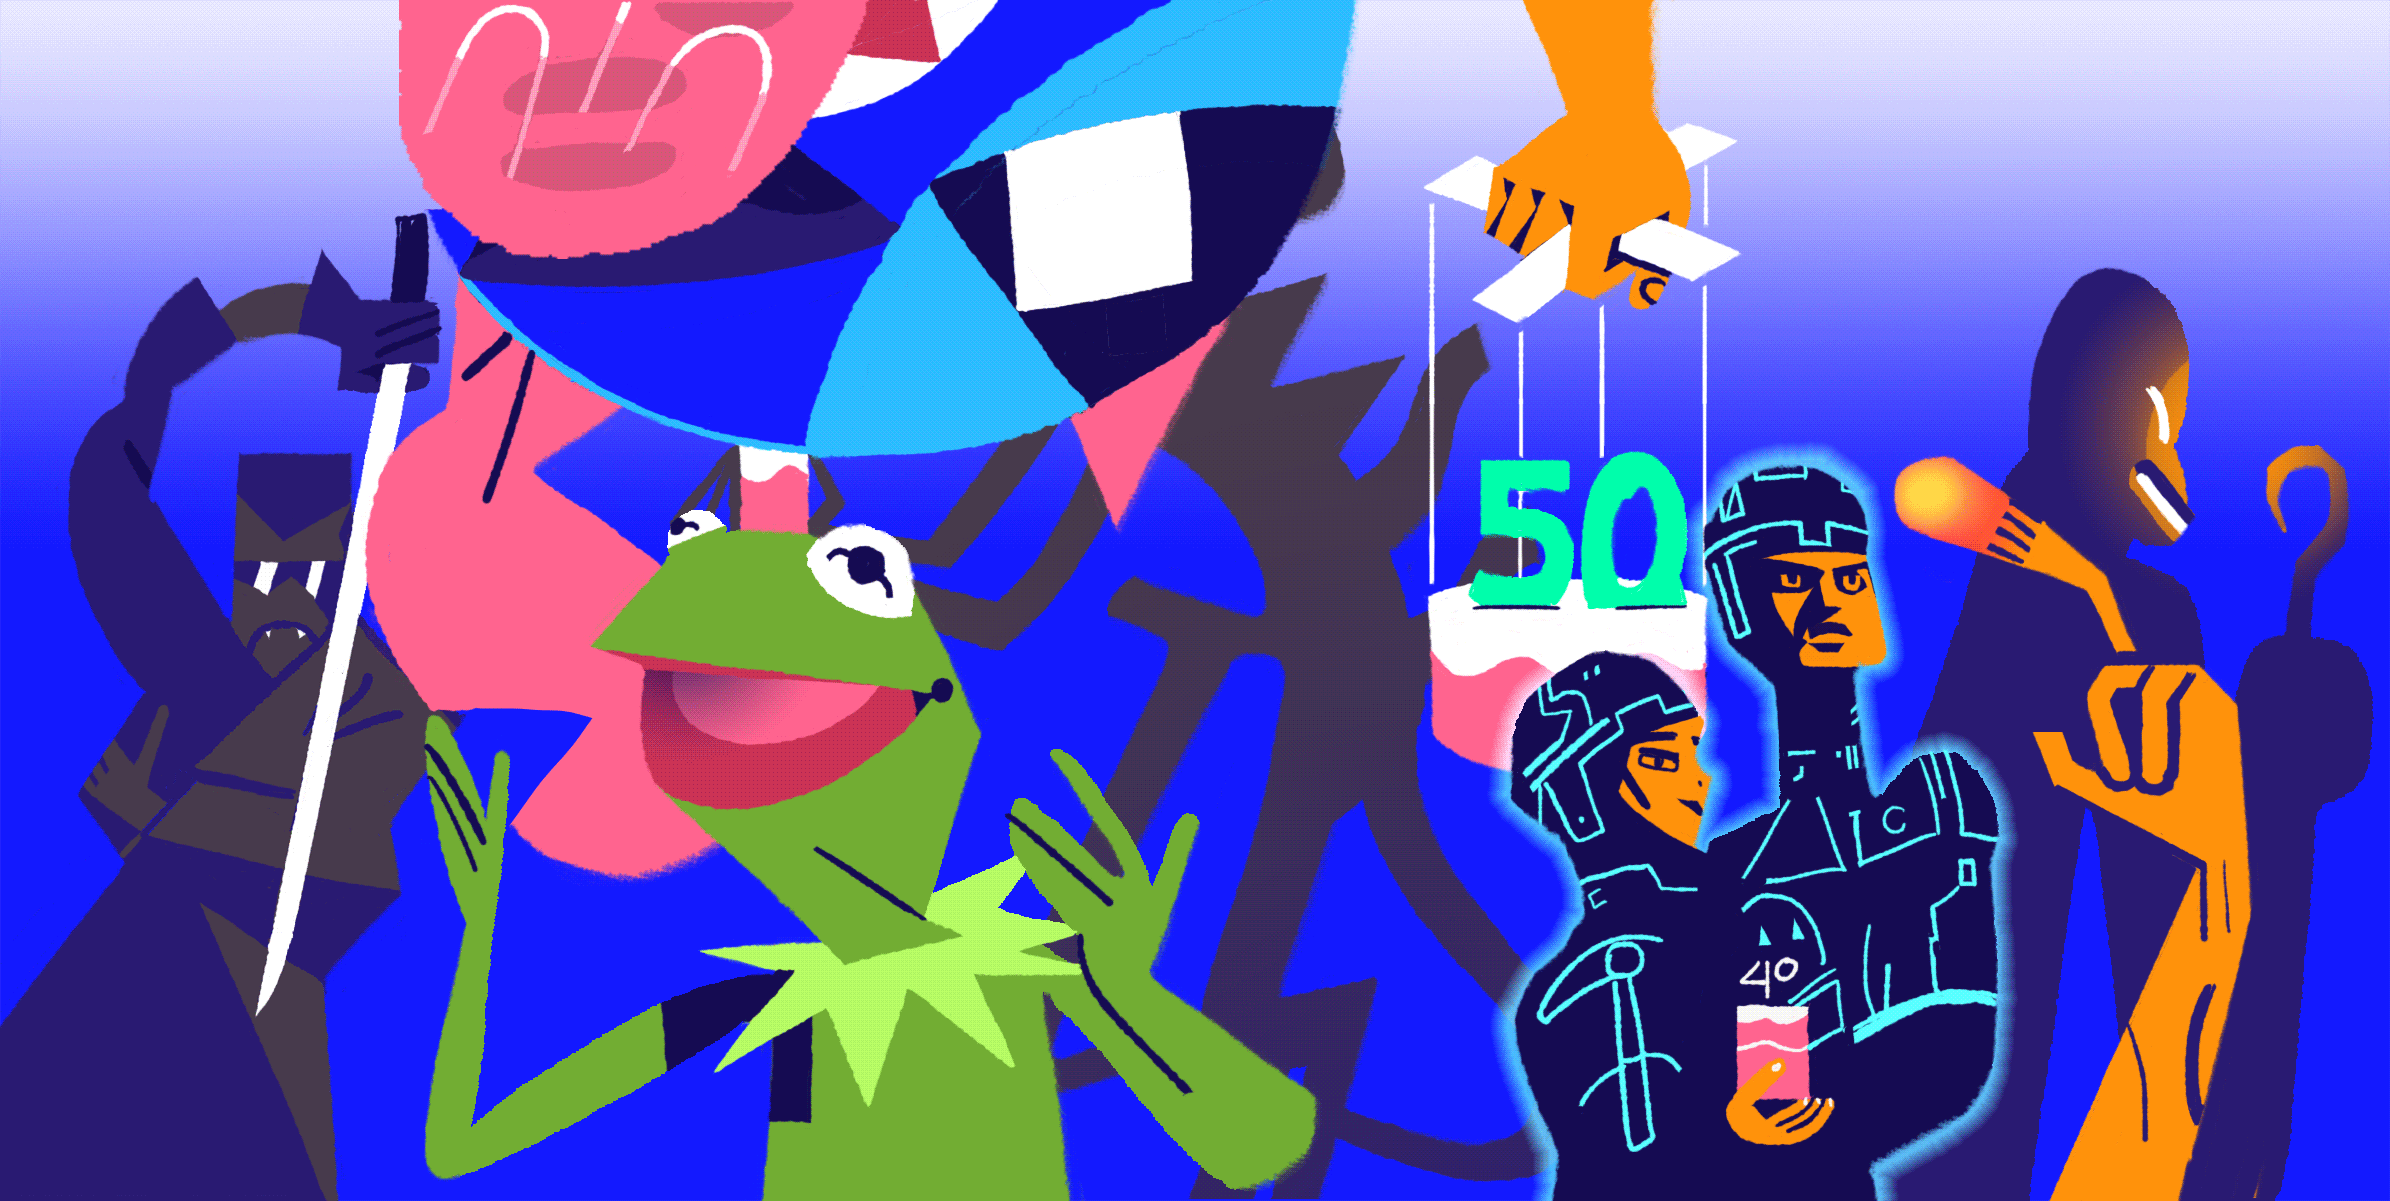 Animated gif featuring various characters from movies celebrating anniversaries in 2022